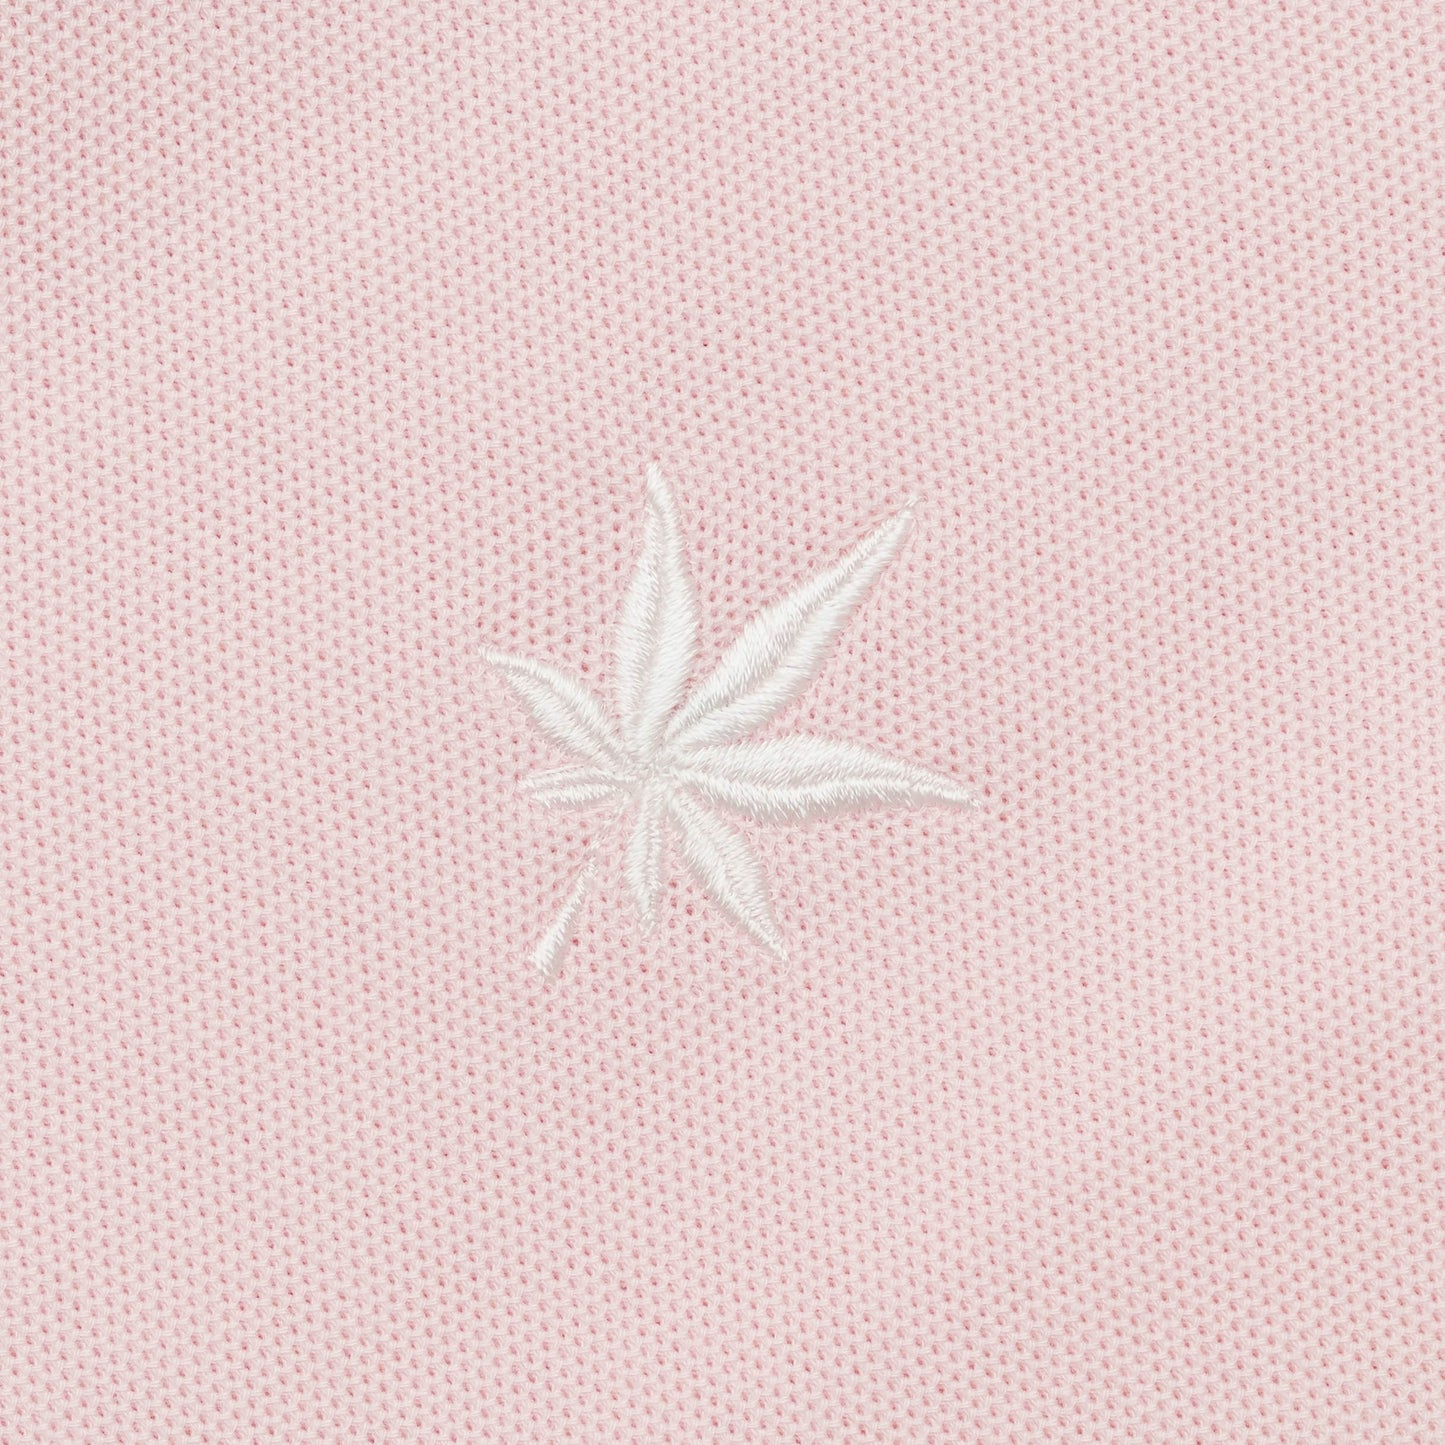 White embroidered leaf.